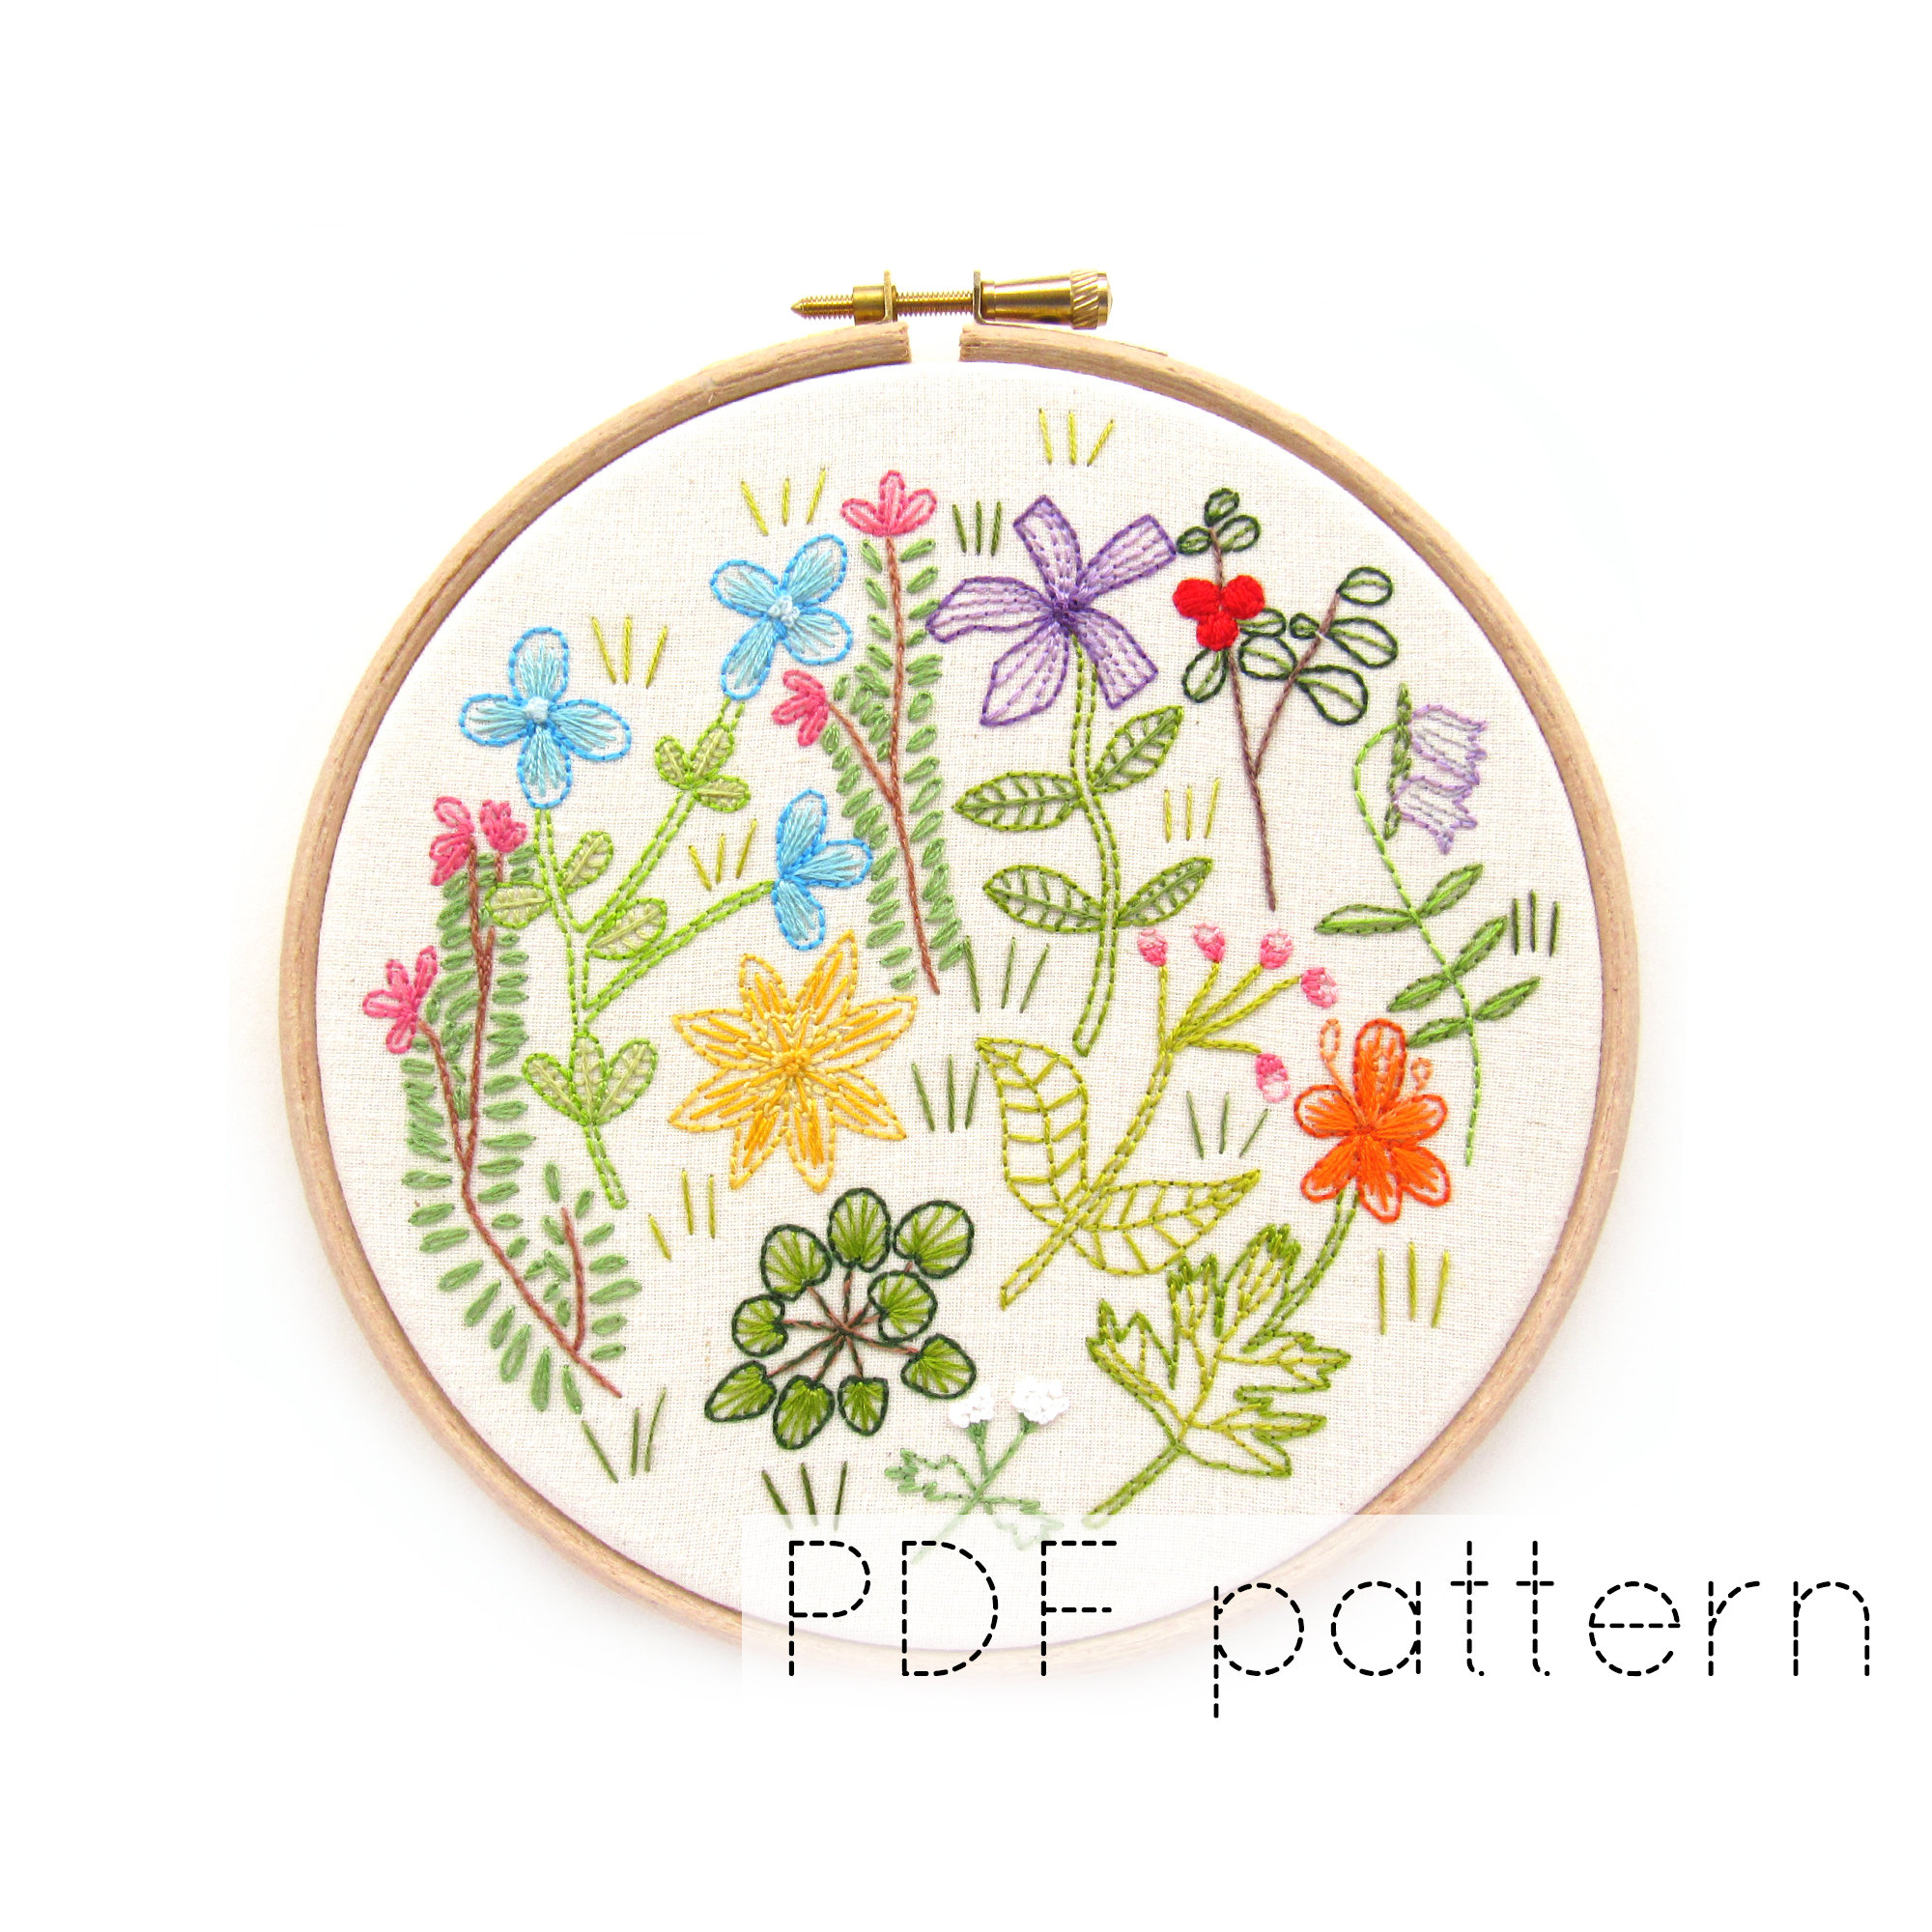 Hand Embroidery Patterns Wildflower Embroidery Pattern Pdf Instant Download Hand Embroidery Hoop Art Pattern